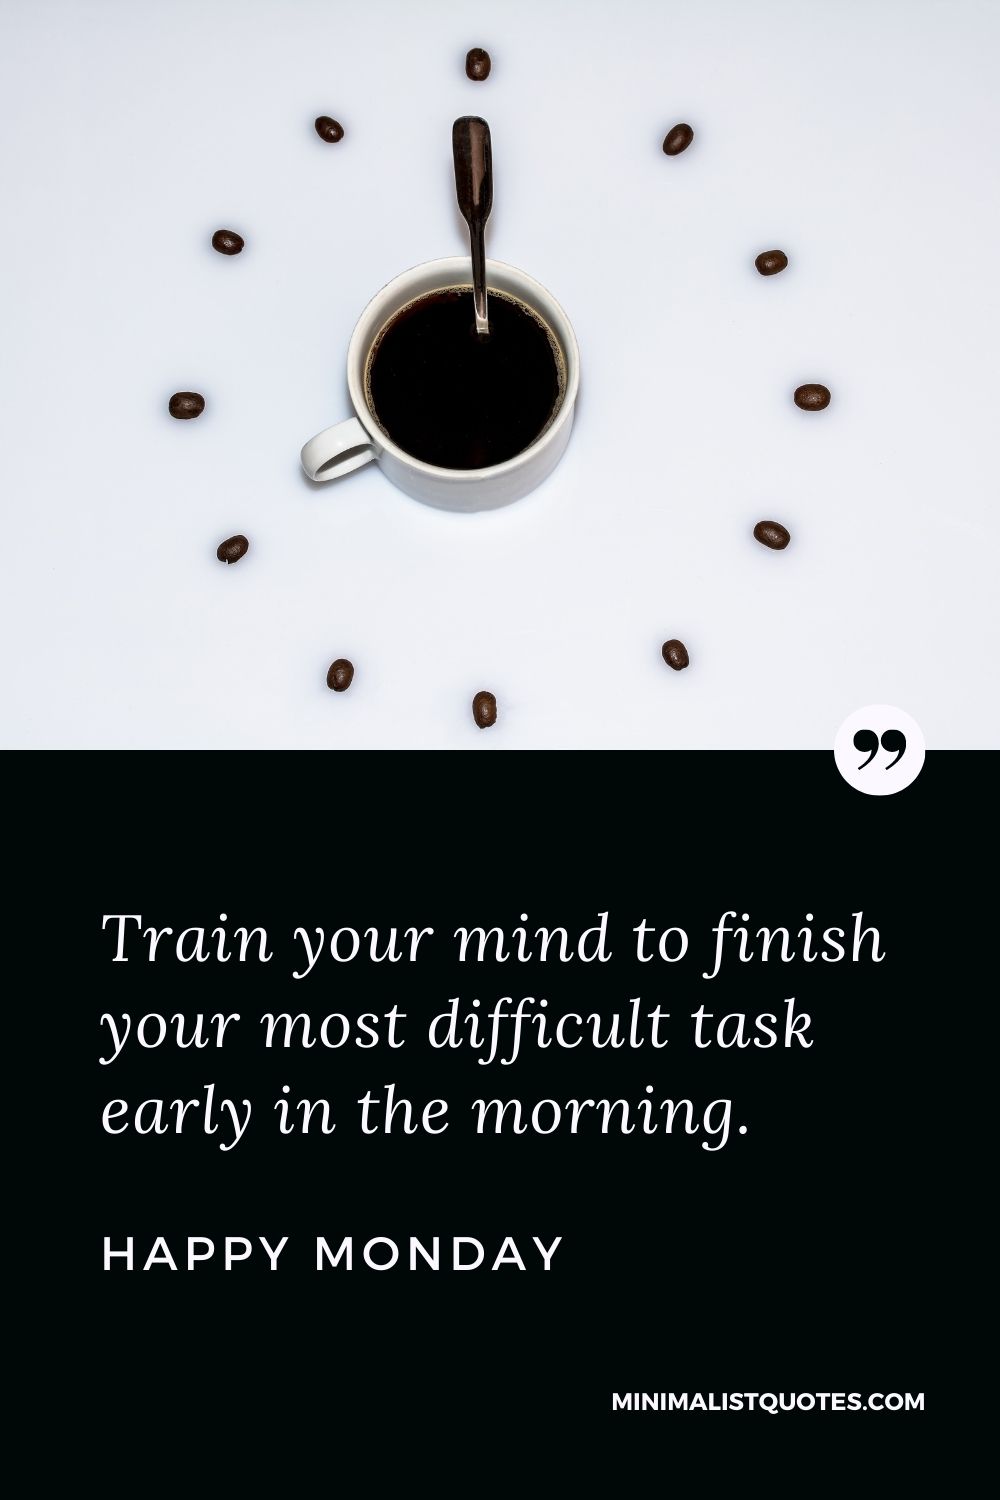 Monday Motivation Quote & Message with Image: Train your mind to finish your most difficult task early in the morning. Happy Monday!